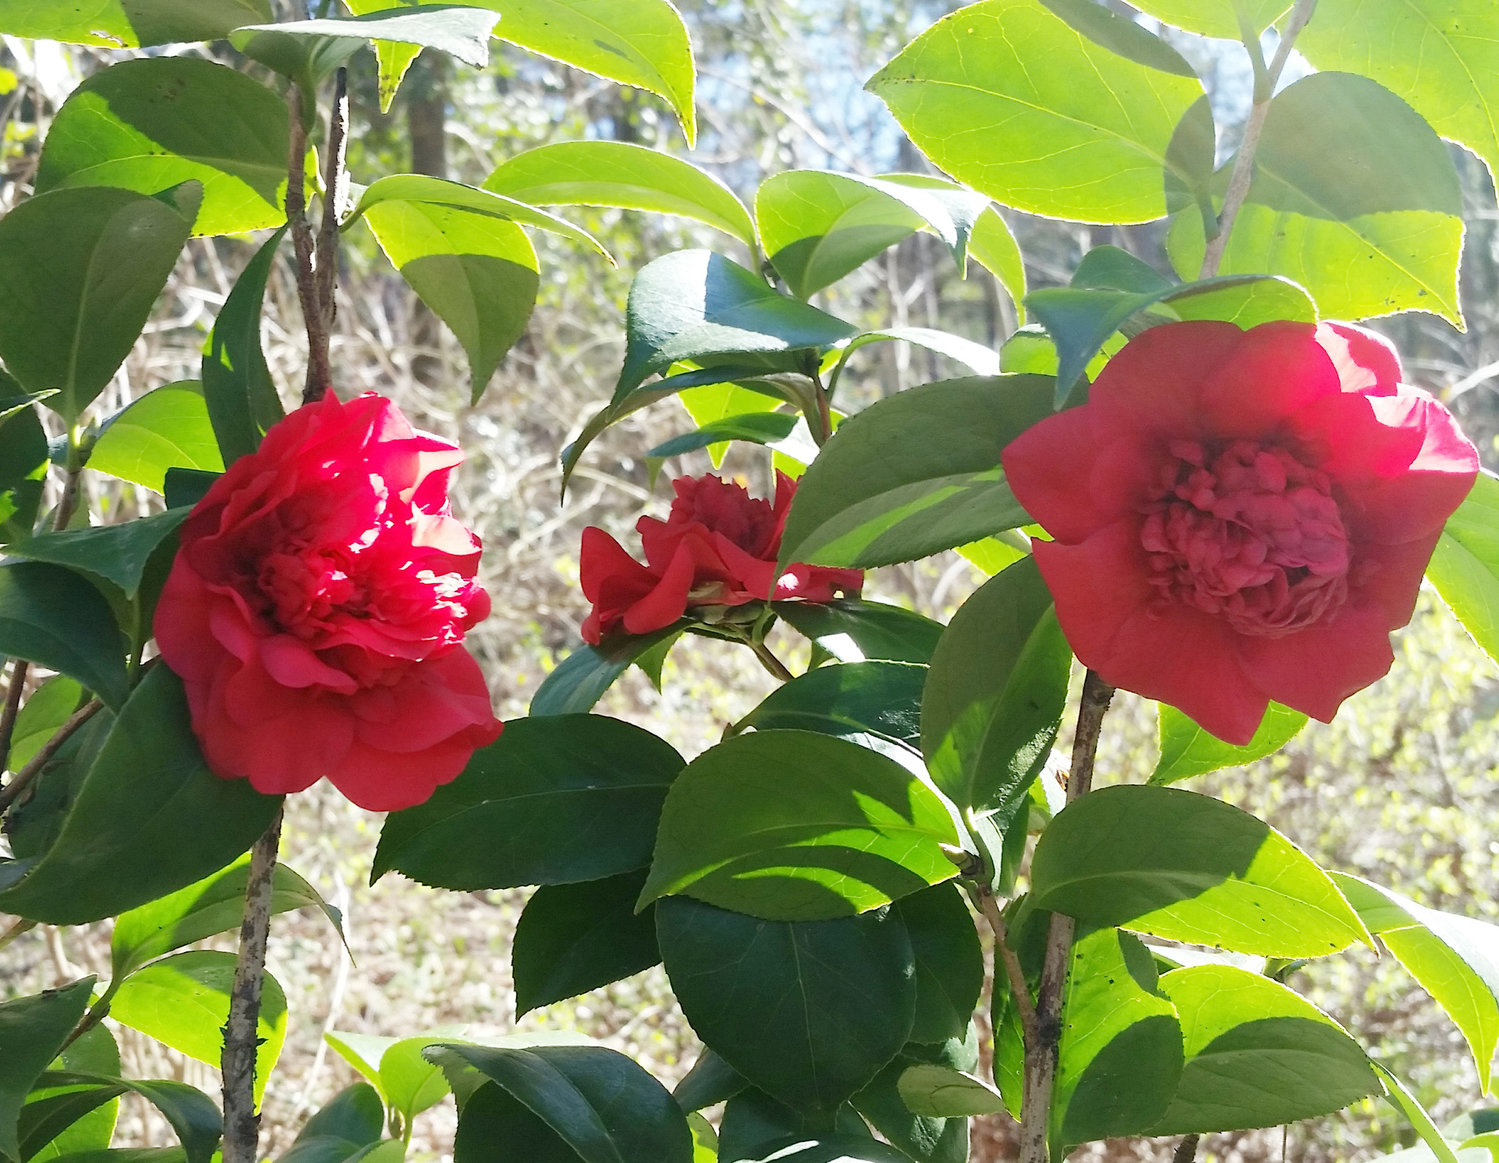 Japanese camellias are the rose of winter in east Texas gardens.